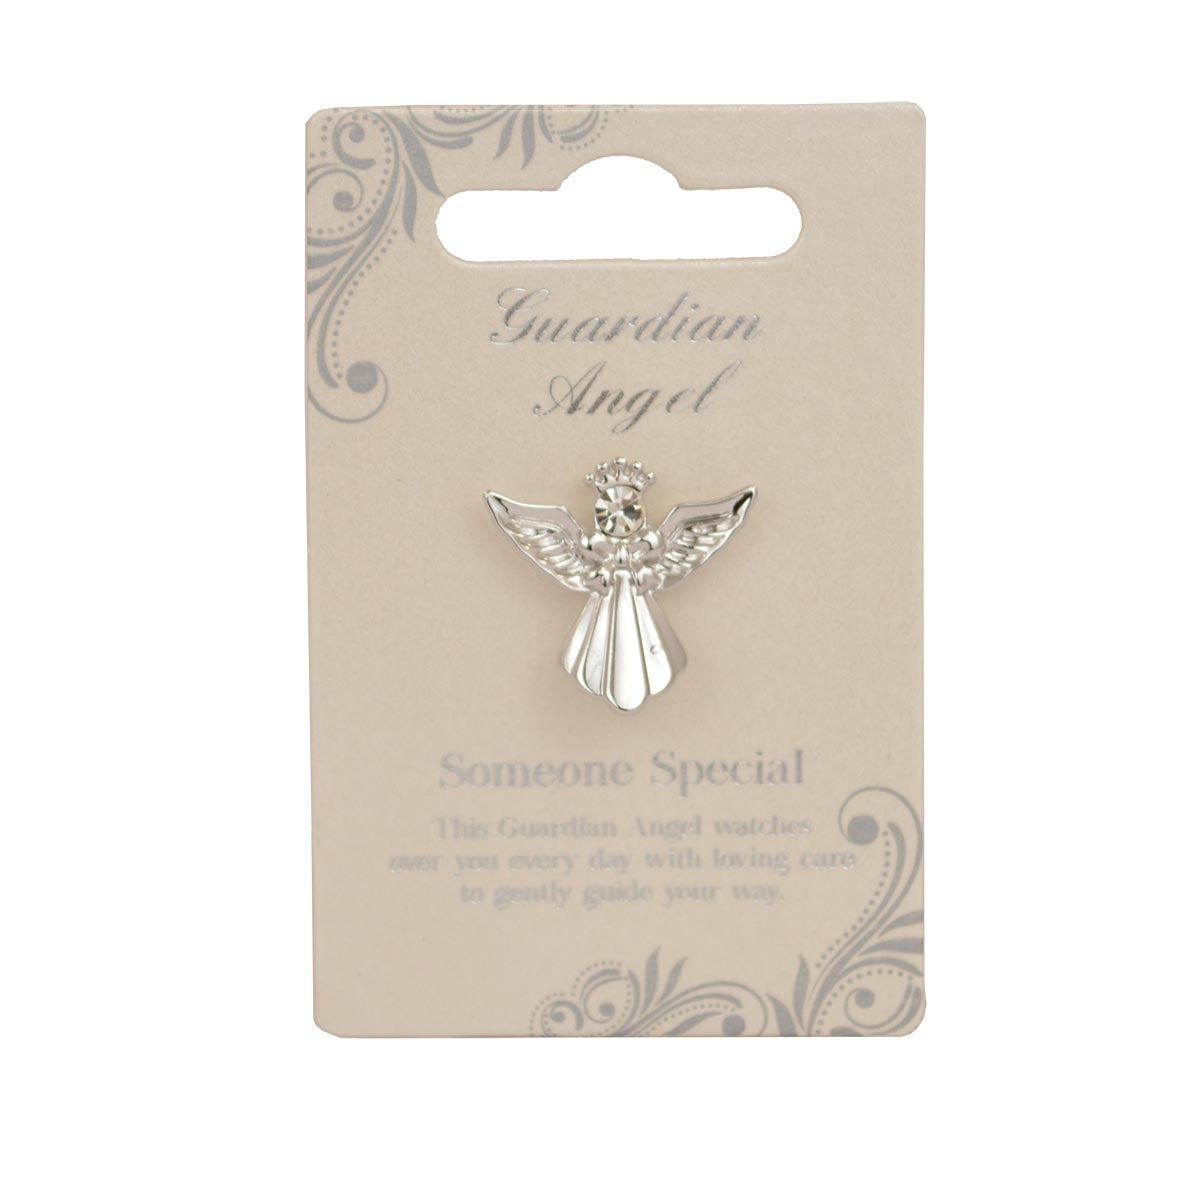 Someone Special Guardian Angel Silver Coloured Angel Pin With Gem Stone